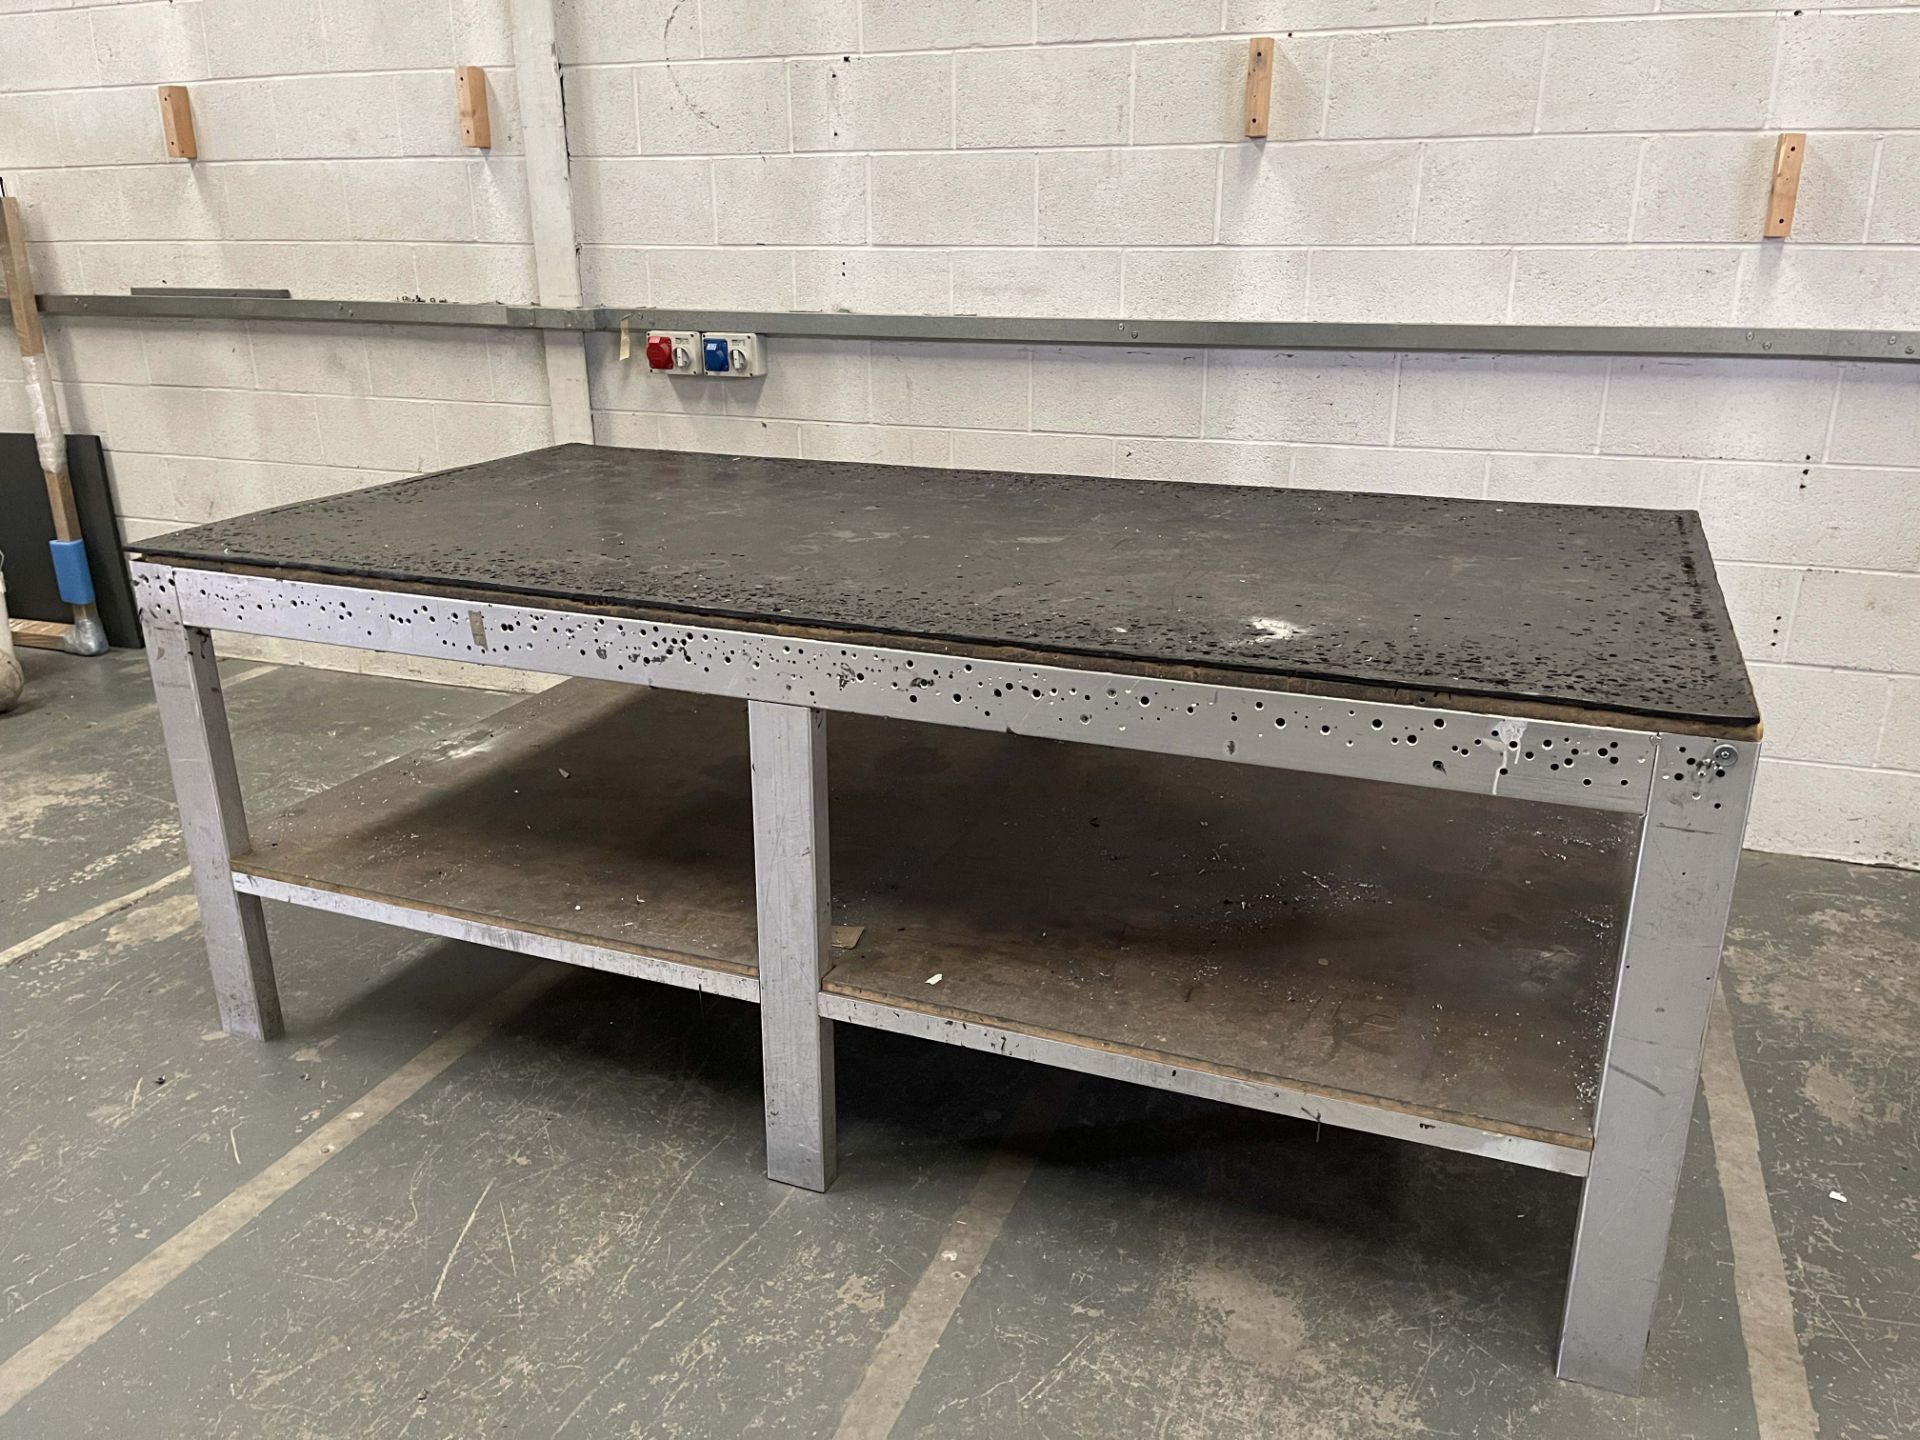 Aluminium Workbench With Rubber Top. Size: 8' x 4' x 3'1" High. - Image 2 of 3